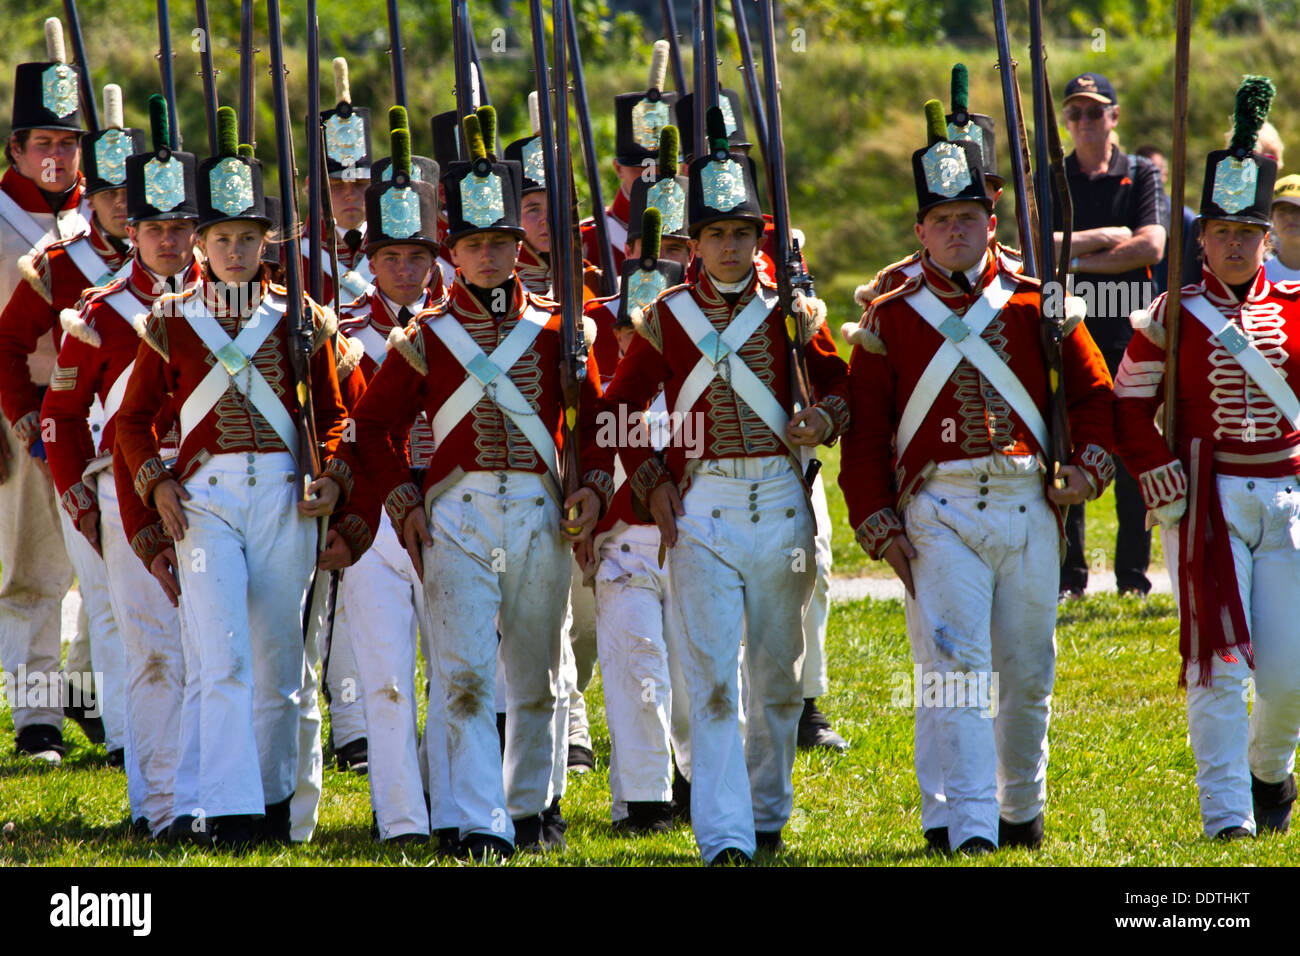 Re-enactment of War of 1812 Fort George Niagara on the Lake Ontario Canada Infantry marching Stock Photo